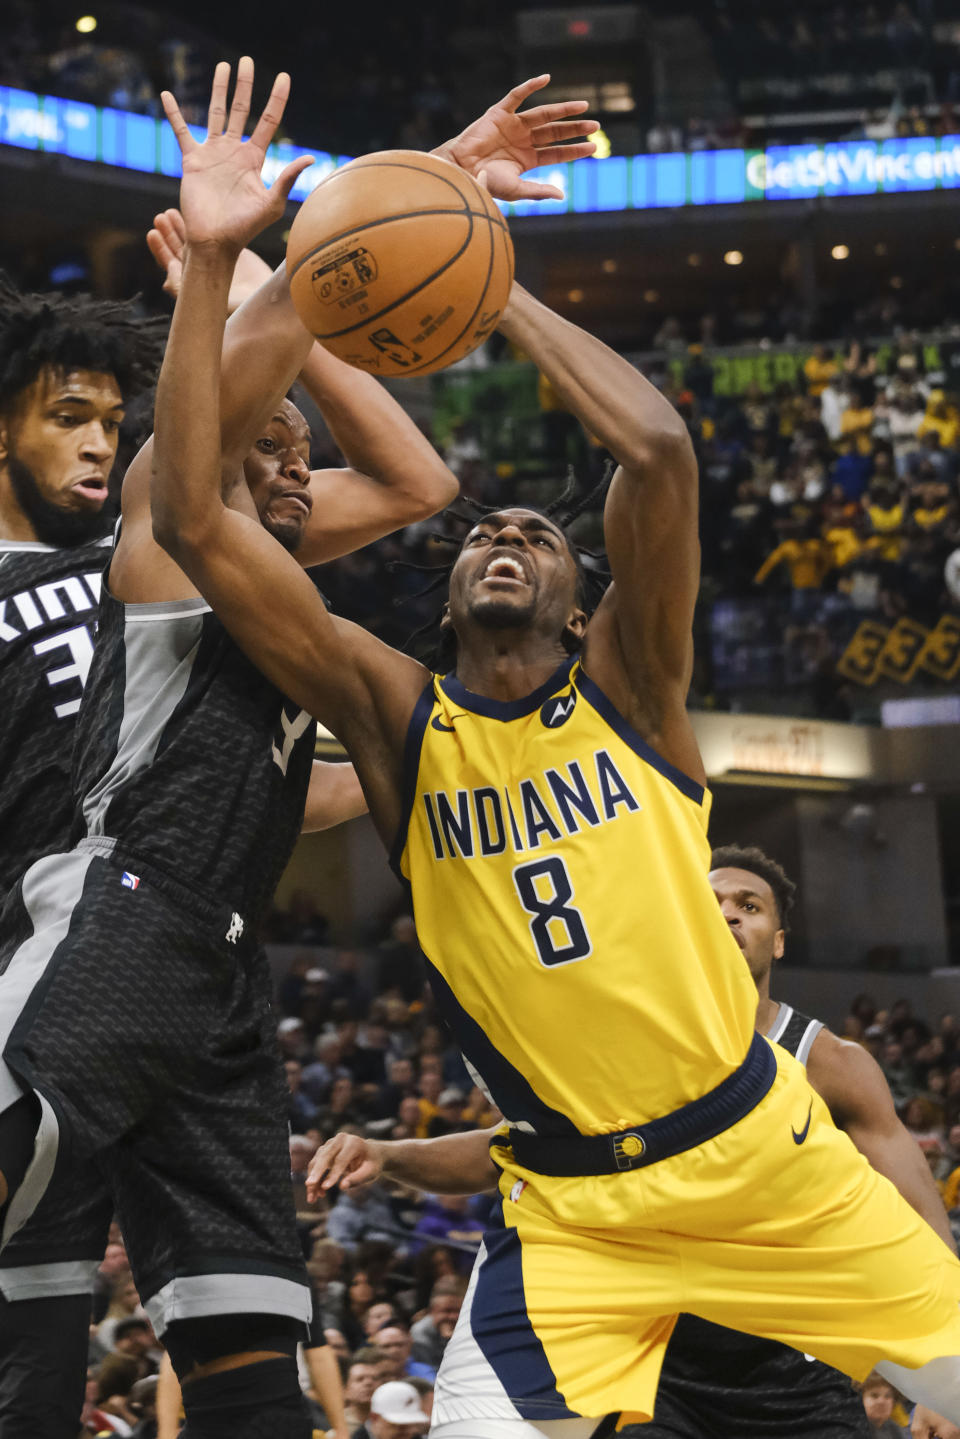 Indiana Pacers forward Justin Holiday (8) loses the ball in front of Sacramento Kings guard Yogi Ferrell (3) during the second half of an NBA basketball game in Indianapolis, Friday, Dec. 20, 2019. The Pacers won 119-105. (AP Photo/AJ Mast)